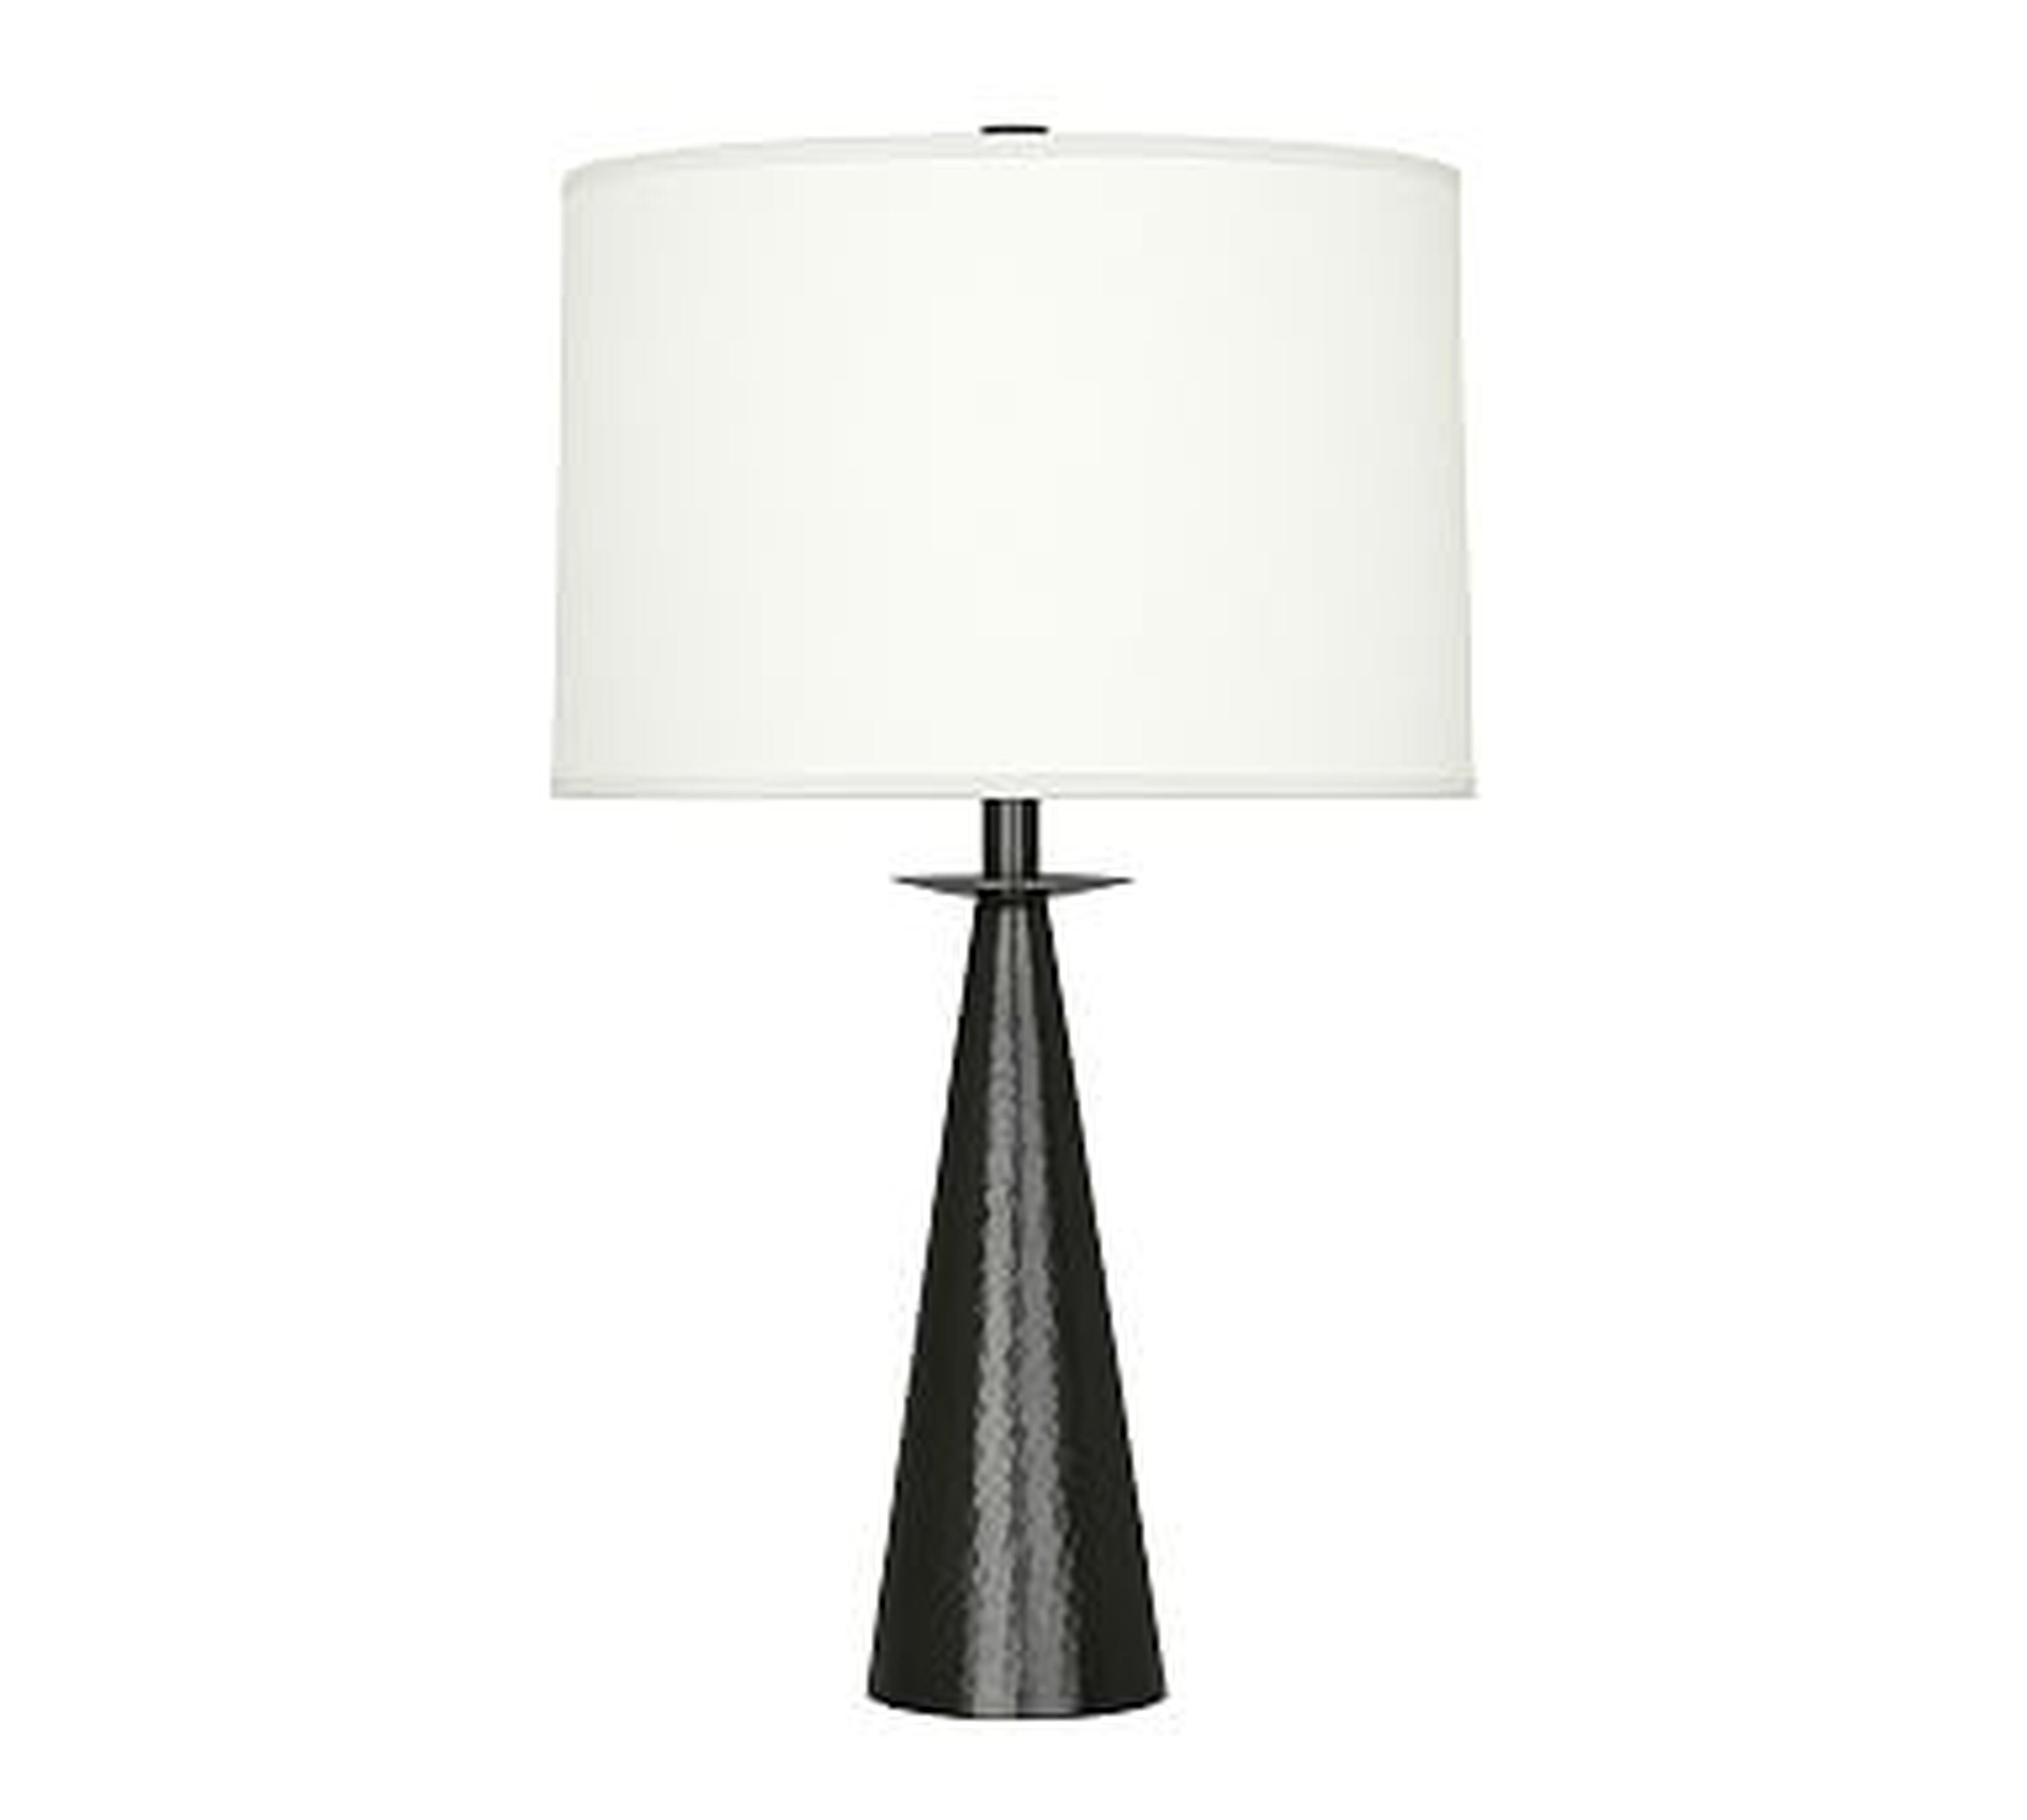 Danielle Small Tapered Table Lamp, Bronze - Pottery Barn